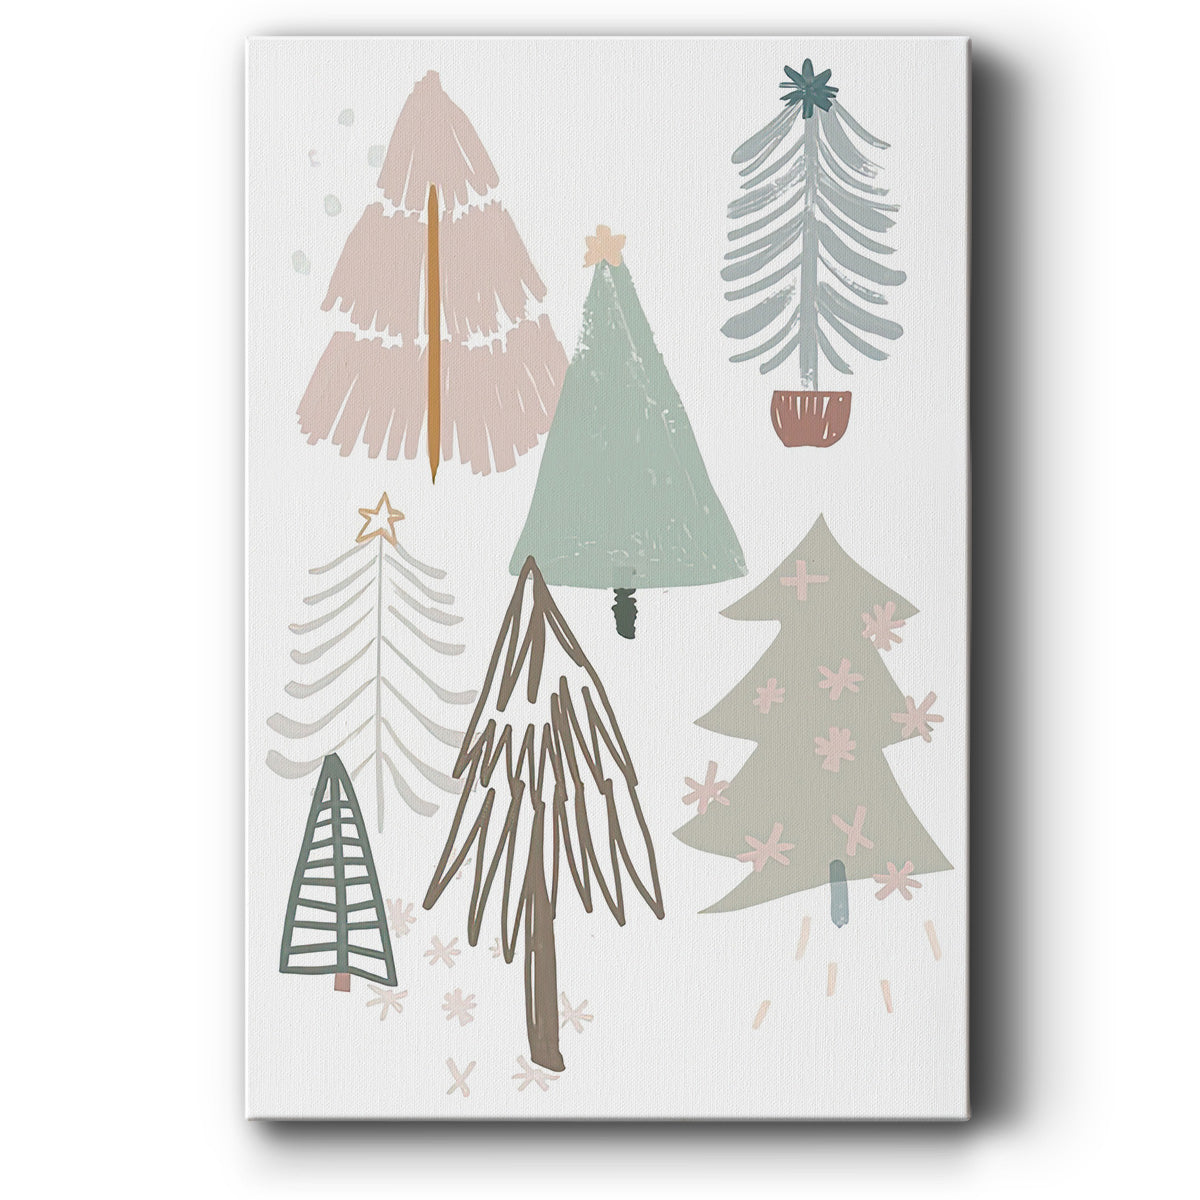 Christmas Tree Sketchbook Collection B - Gallery Wrapped Canvas